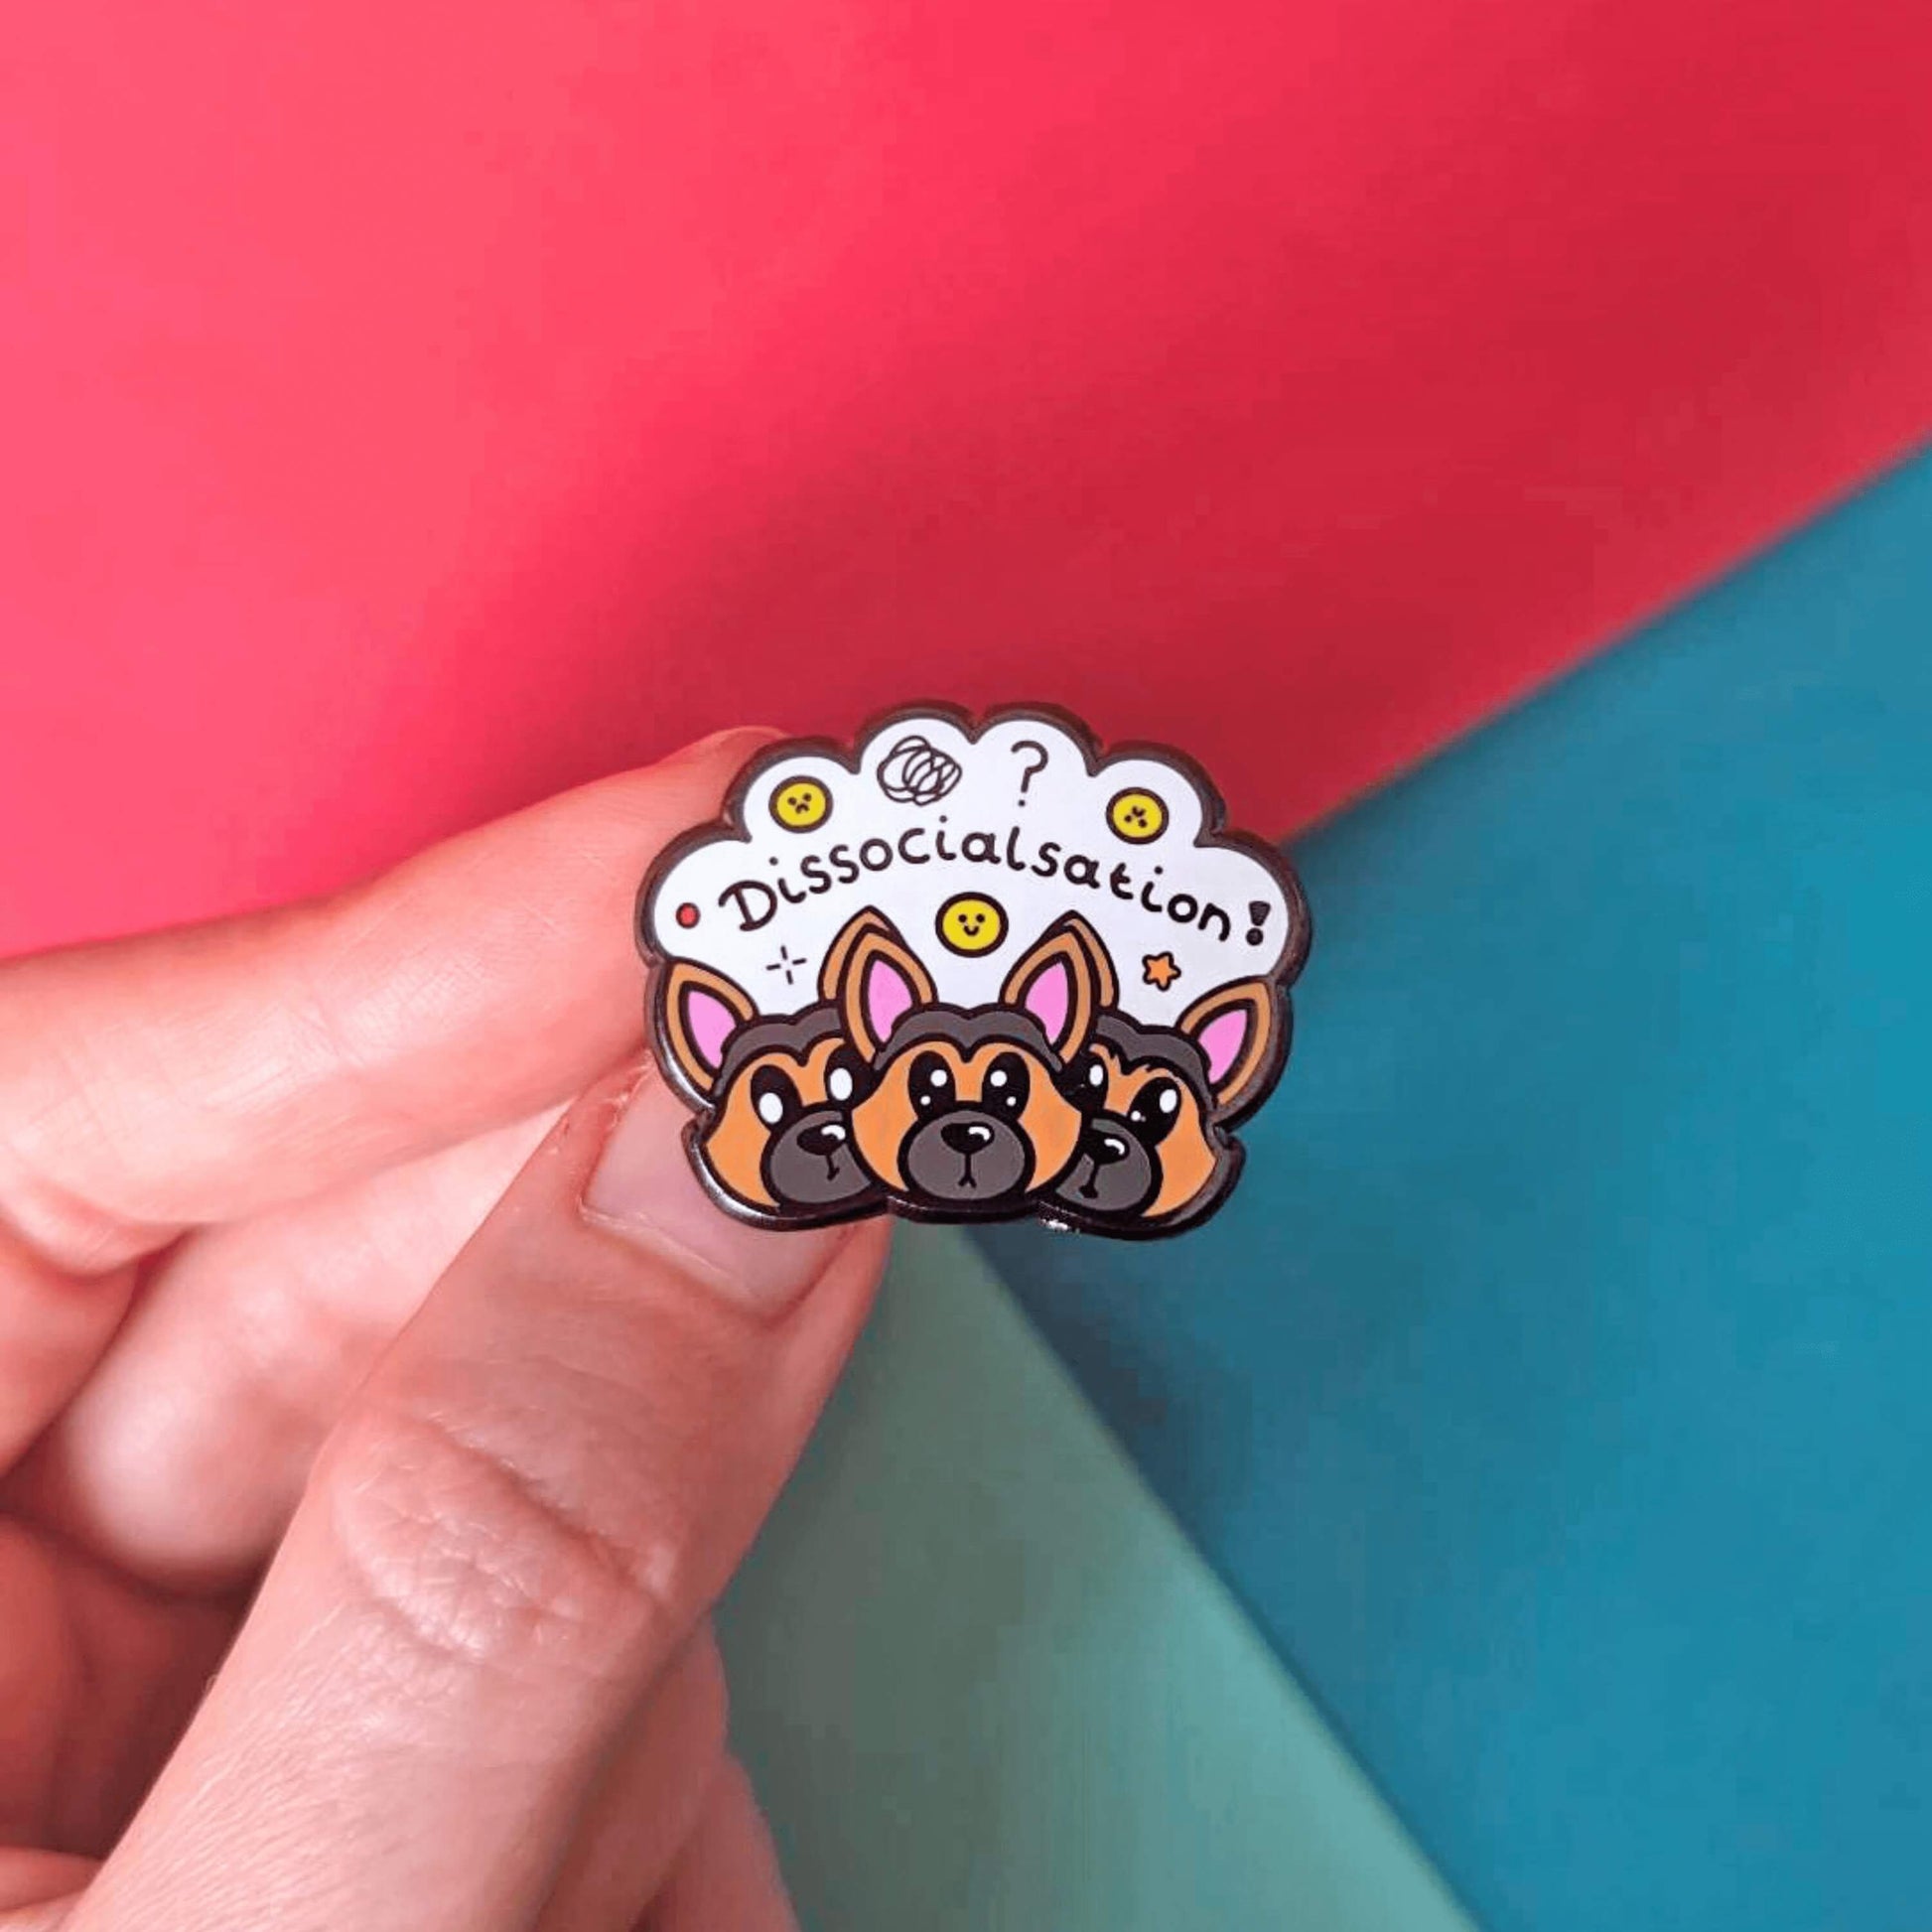 The Dissocialsation Enamel Pin - Dissociation held over a red and blue background. Three confused brown and black Alsatian dog heads with their ears perked up, above them is a white cloud with sad and happy yellow faces, sparkles, question marks and black text reading 'dissocialsation!'. The design is raising awareness for dissociation.